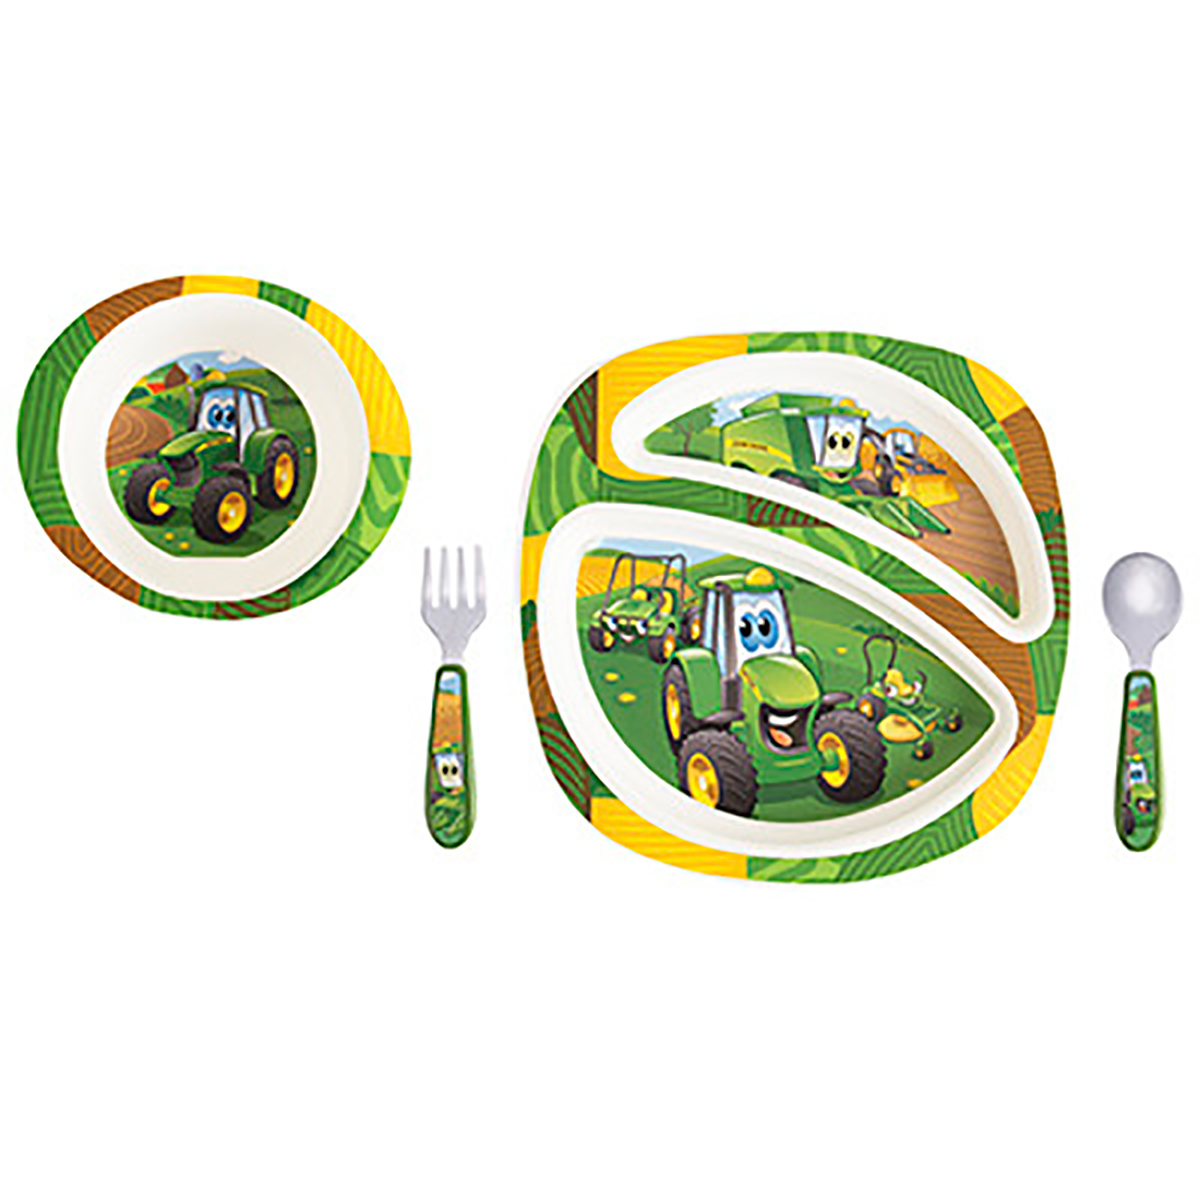 4 Piece Johnny Tractor And Friends Dish Set